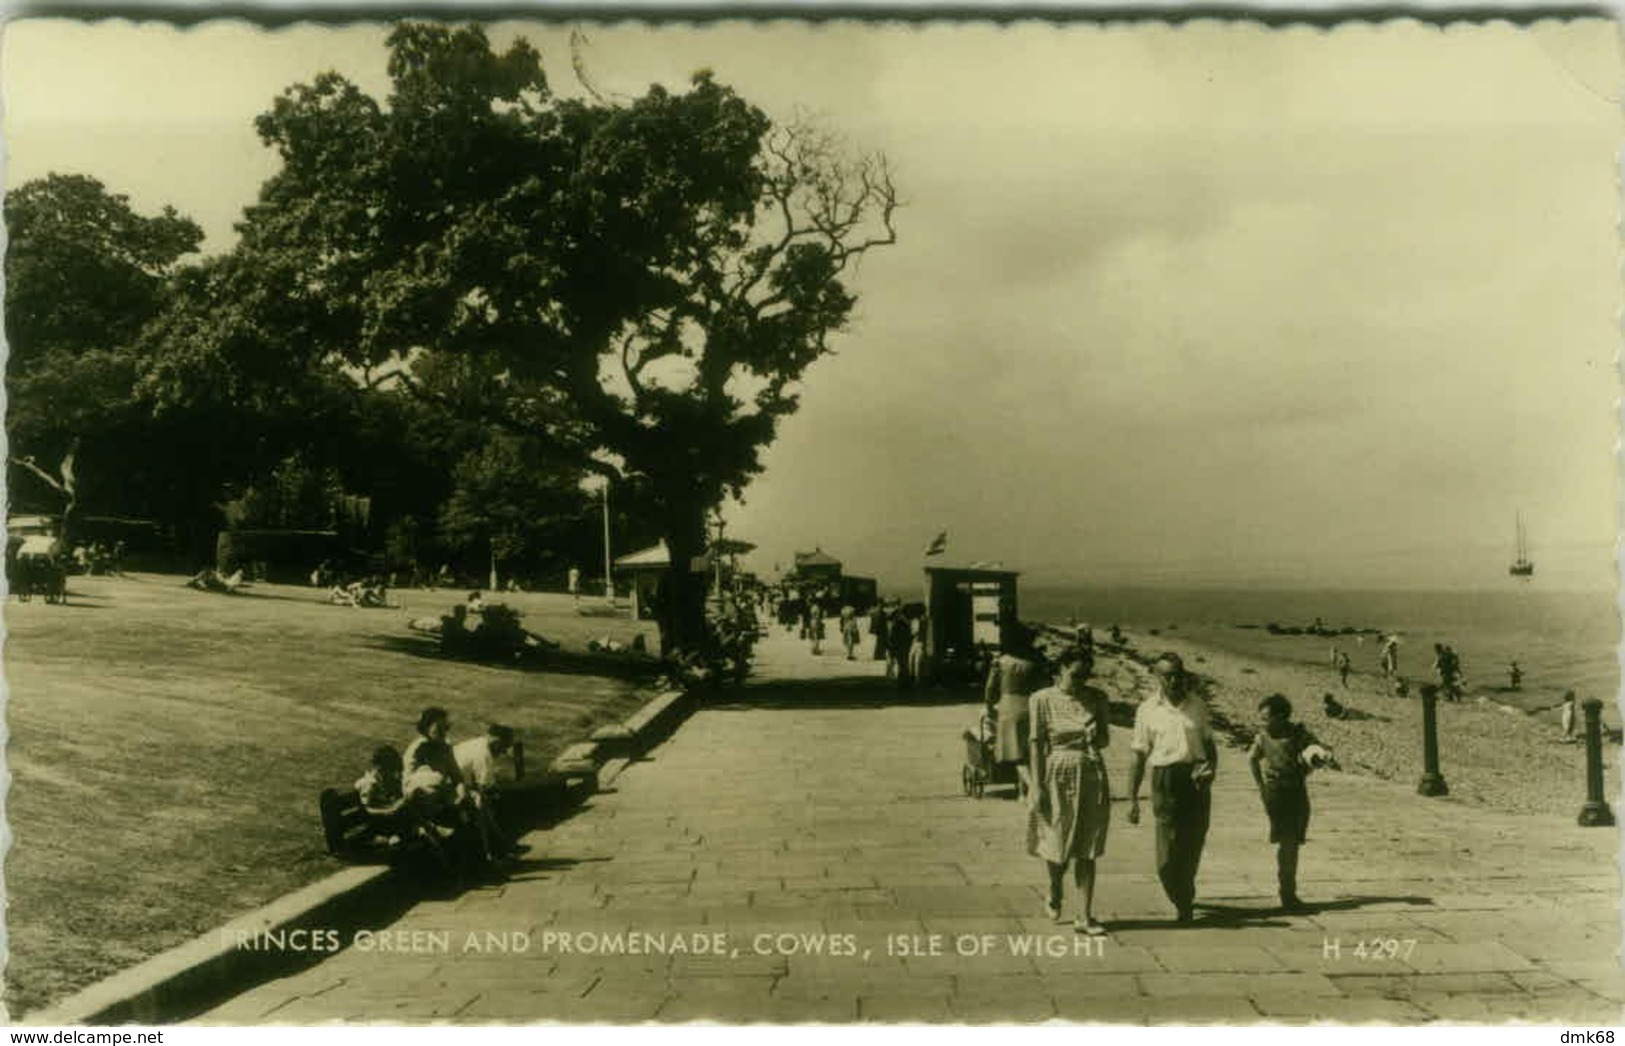 ISLE OF WIGHT - PRINCES GREEN AND PROMENADE - COWES - 1950s (BG5666) - Cowes